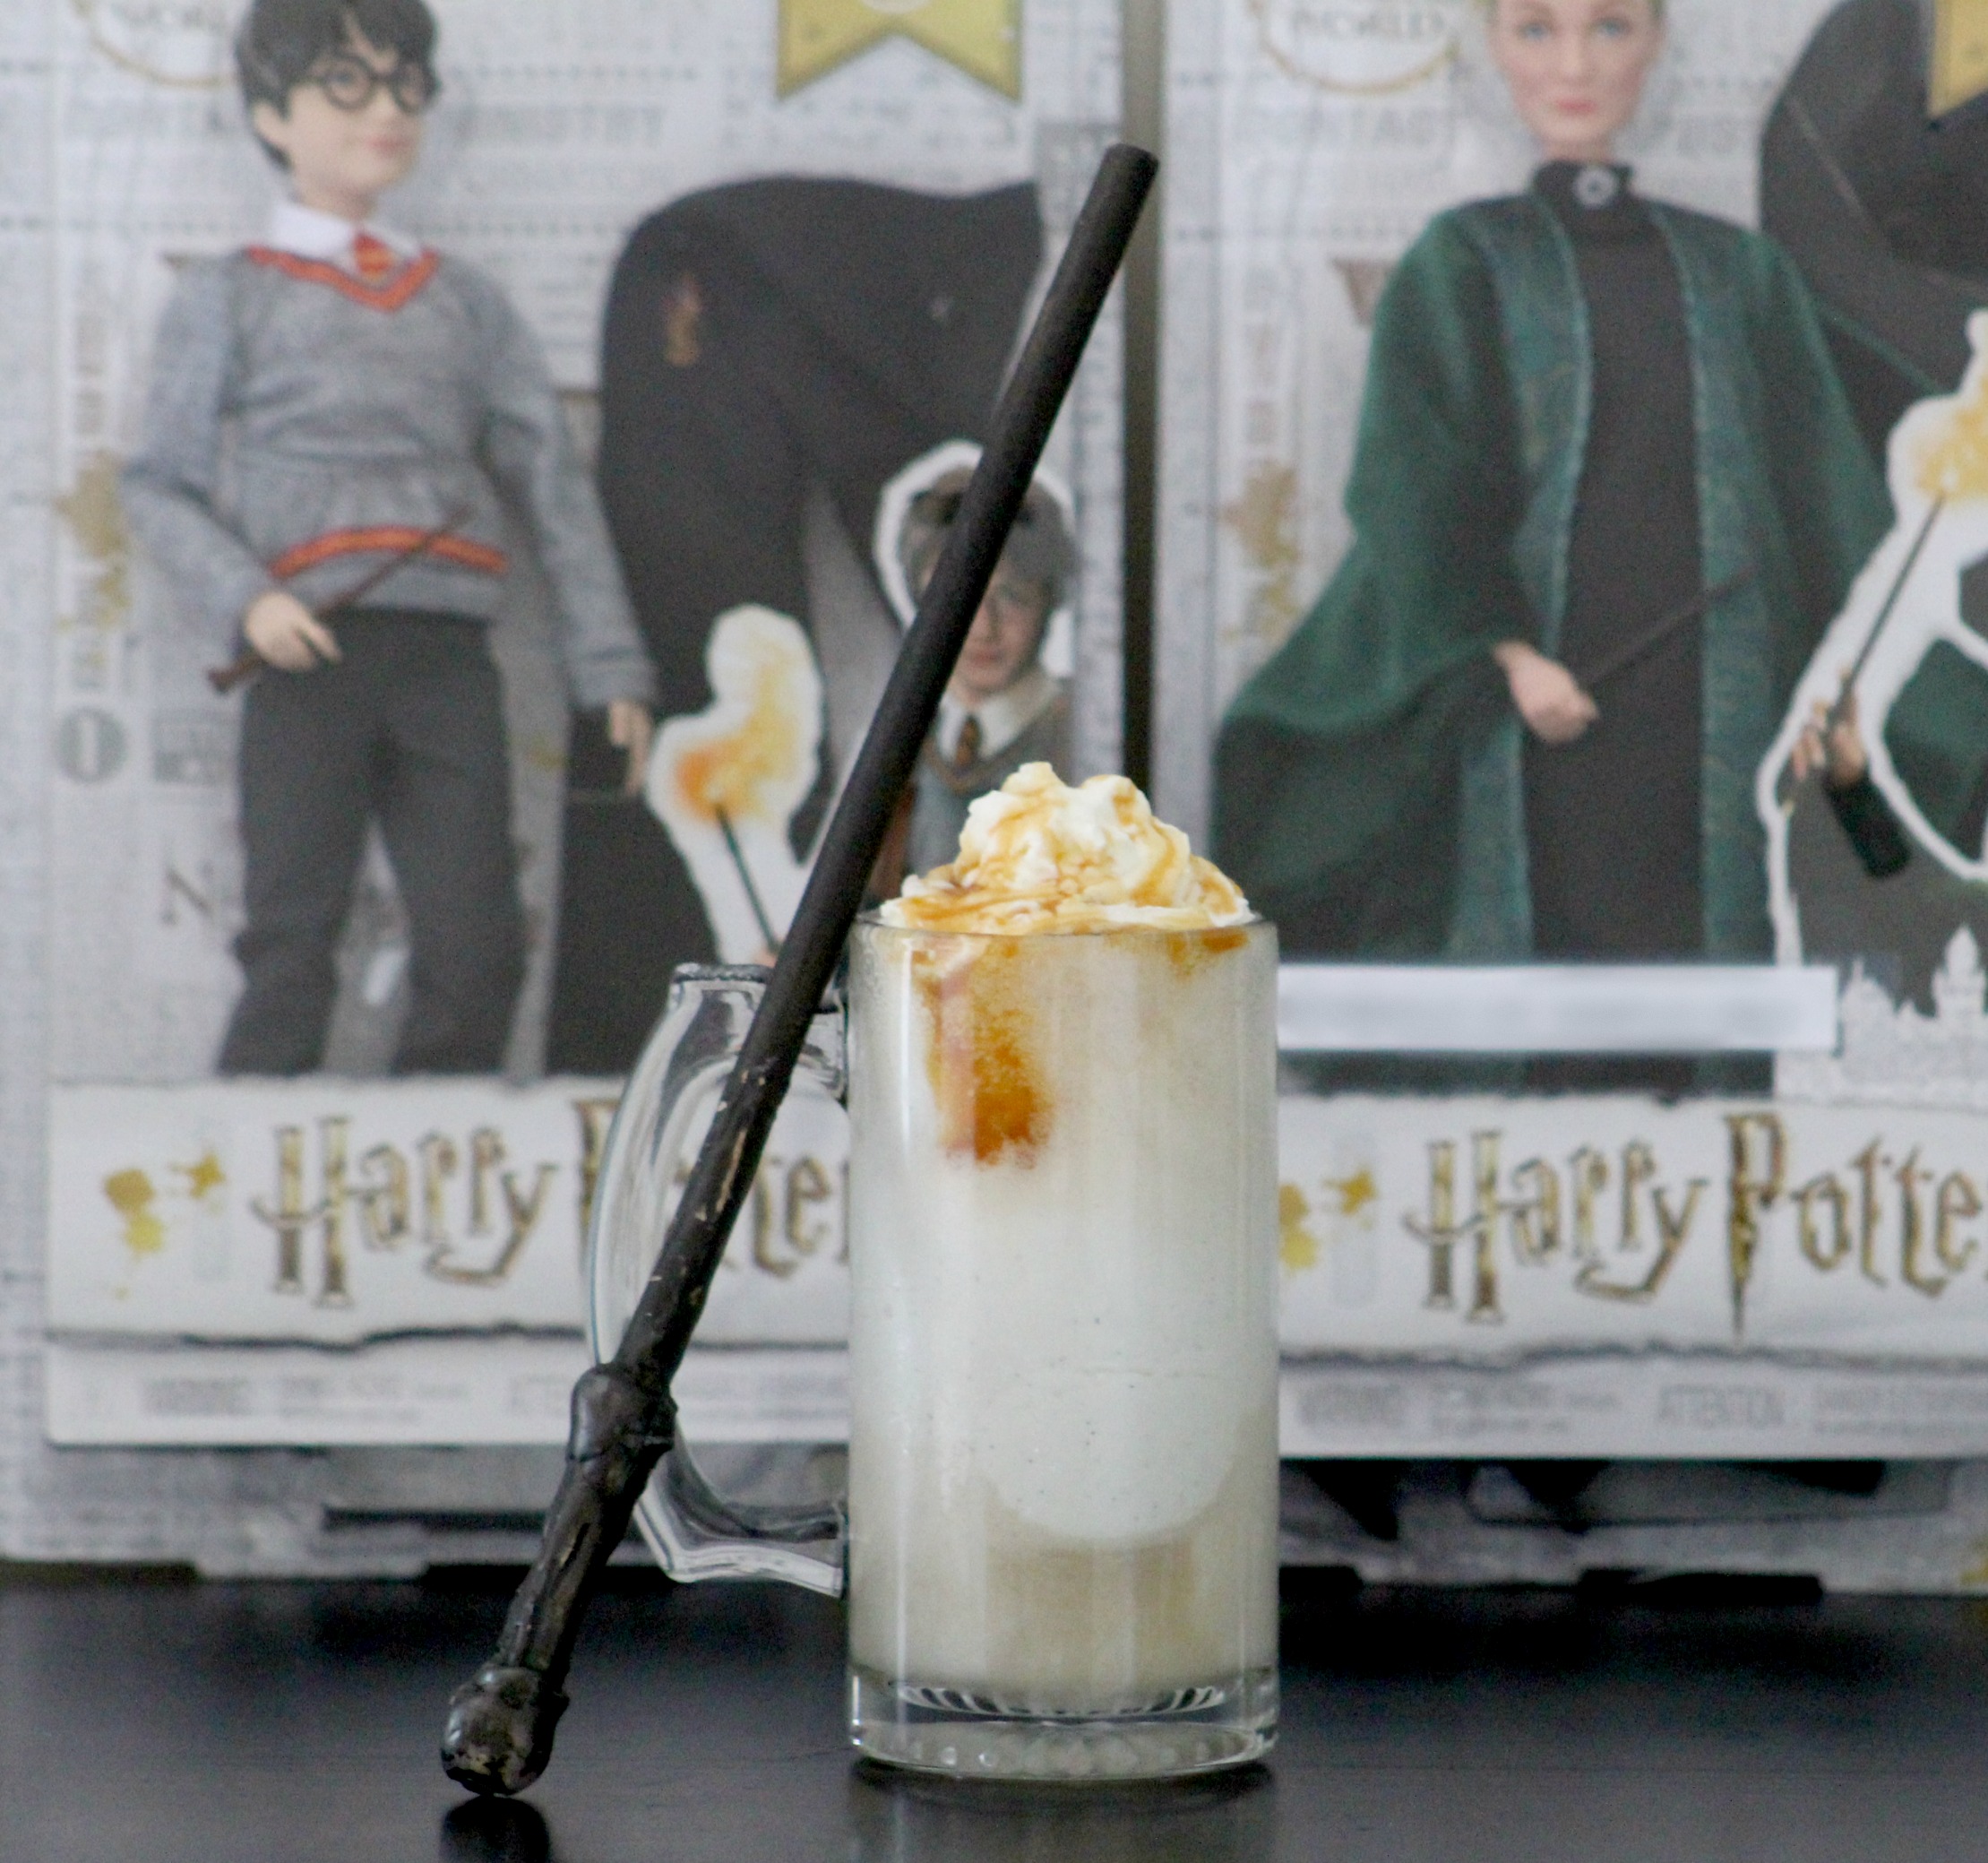 harry potter party